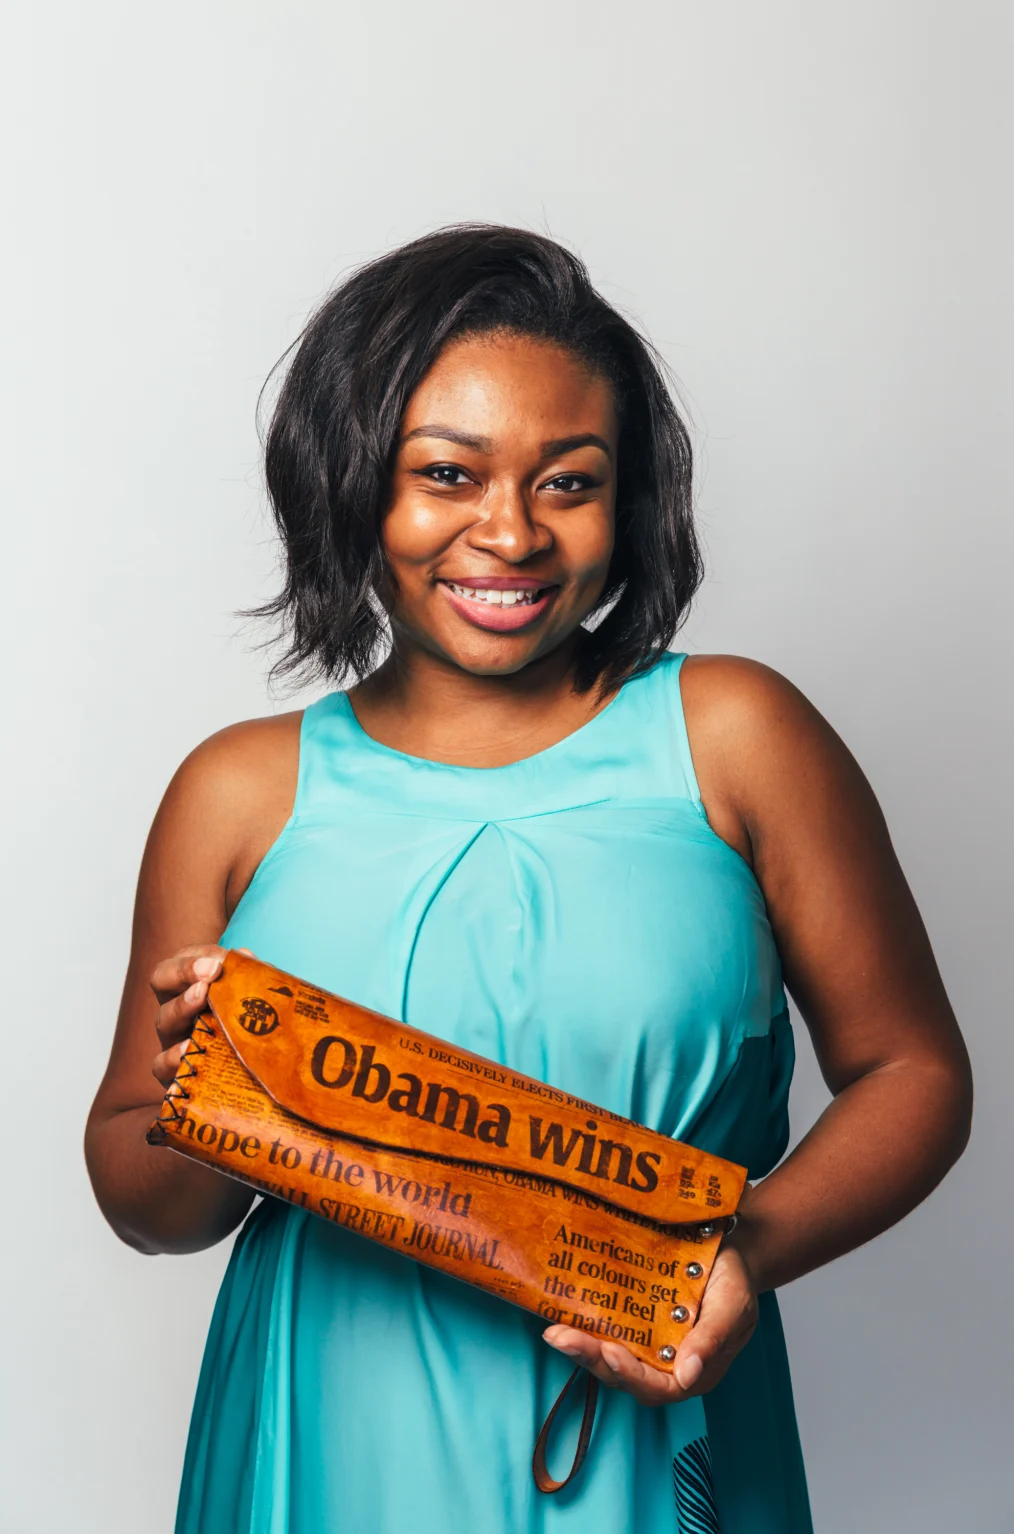 Pier Smith holds her Obama clutch and smiles to camera.